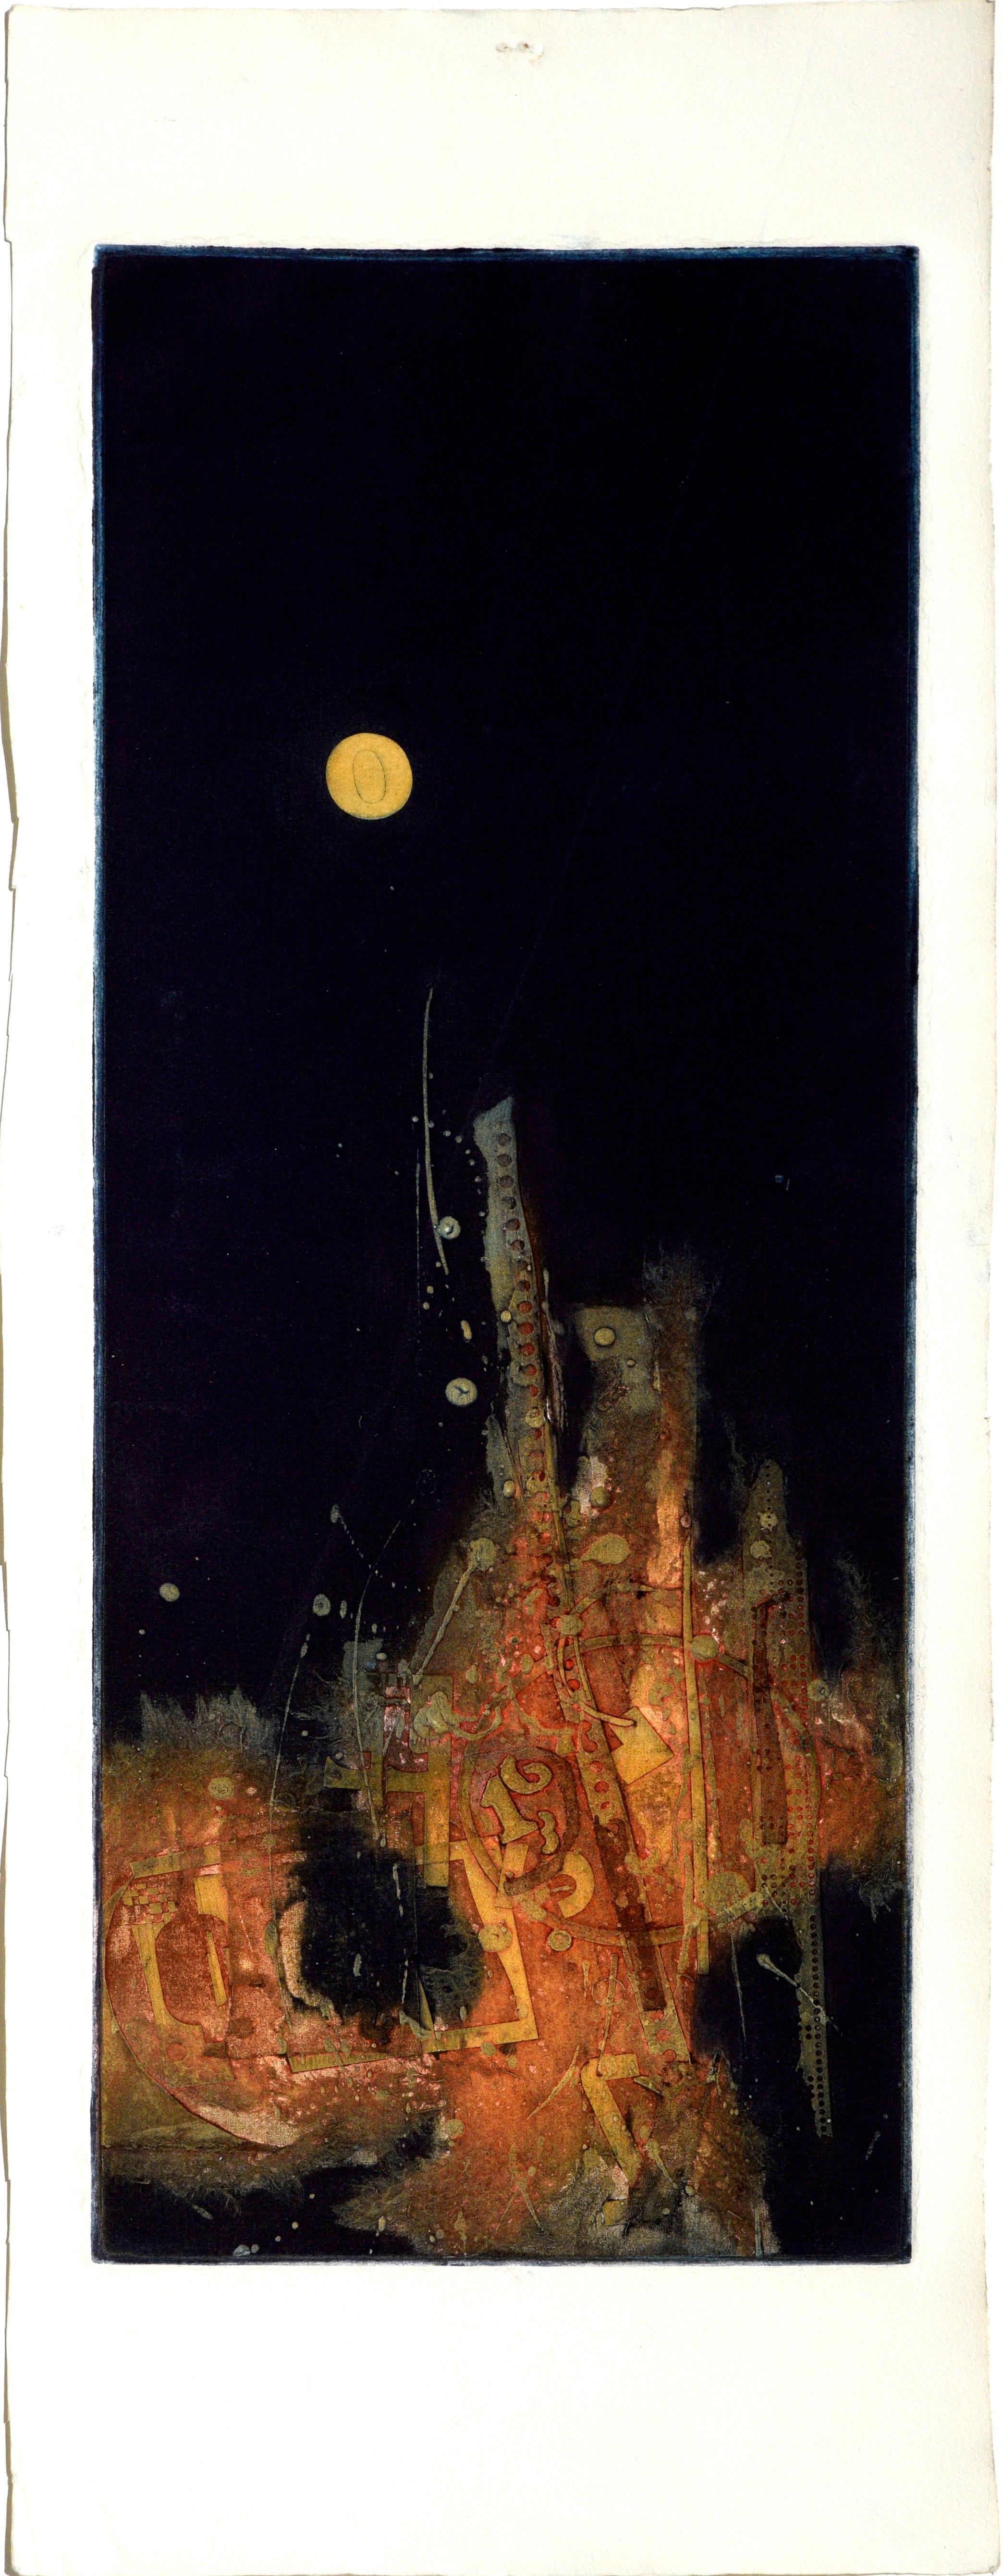 Patricia A Pearce Abstract Print - Nocturnal Abstracted Full Moon Lava Landscape Lithograph